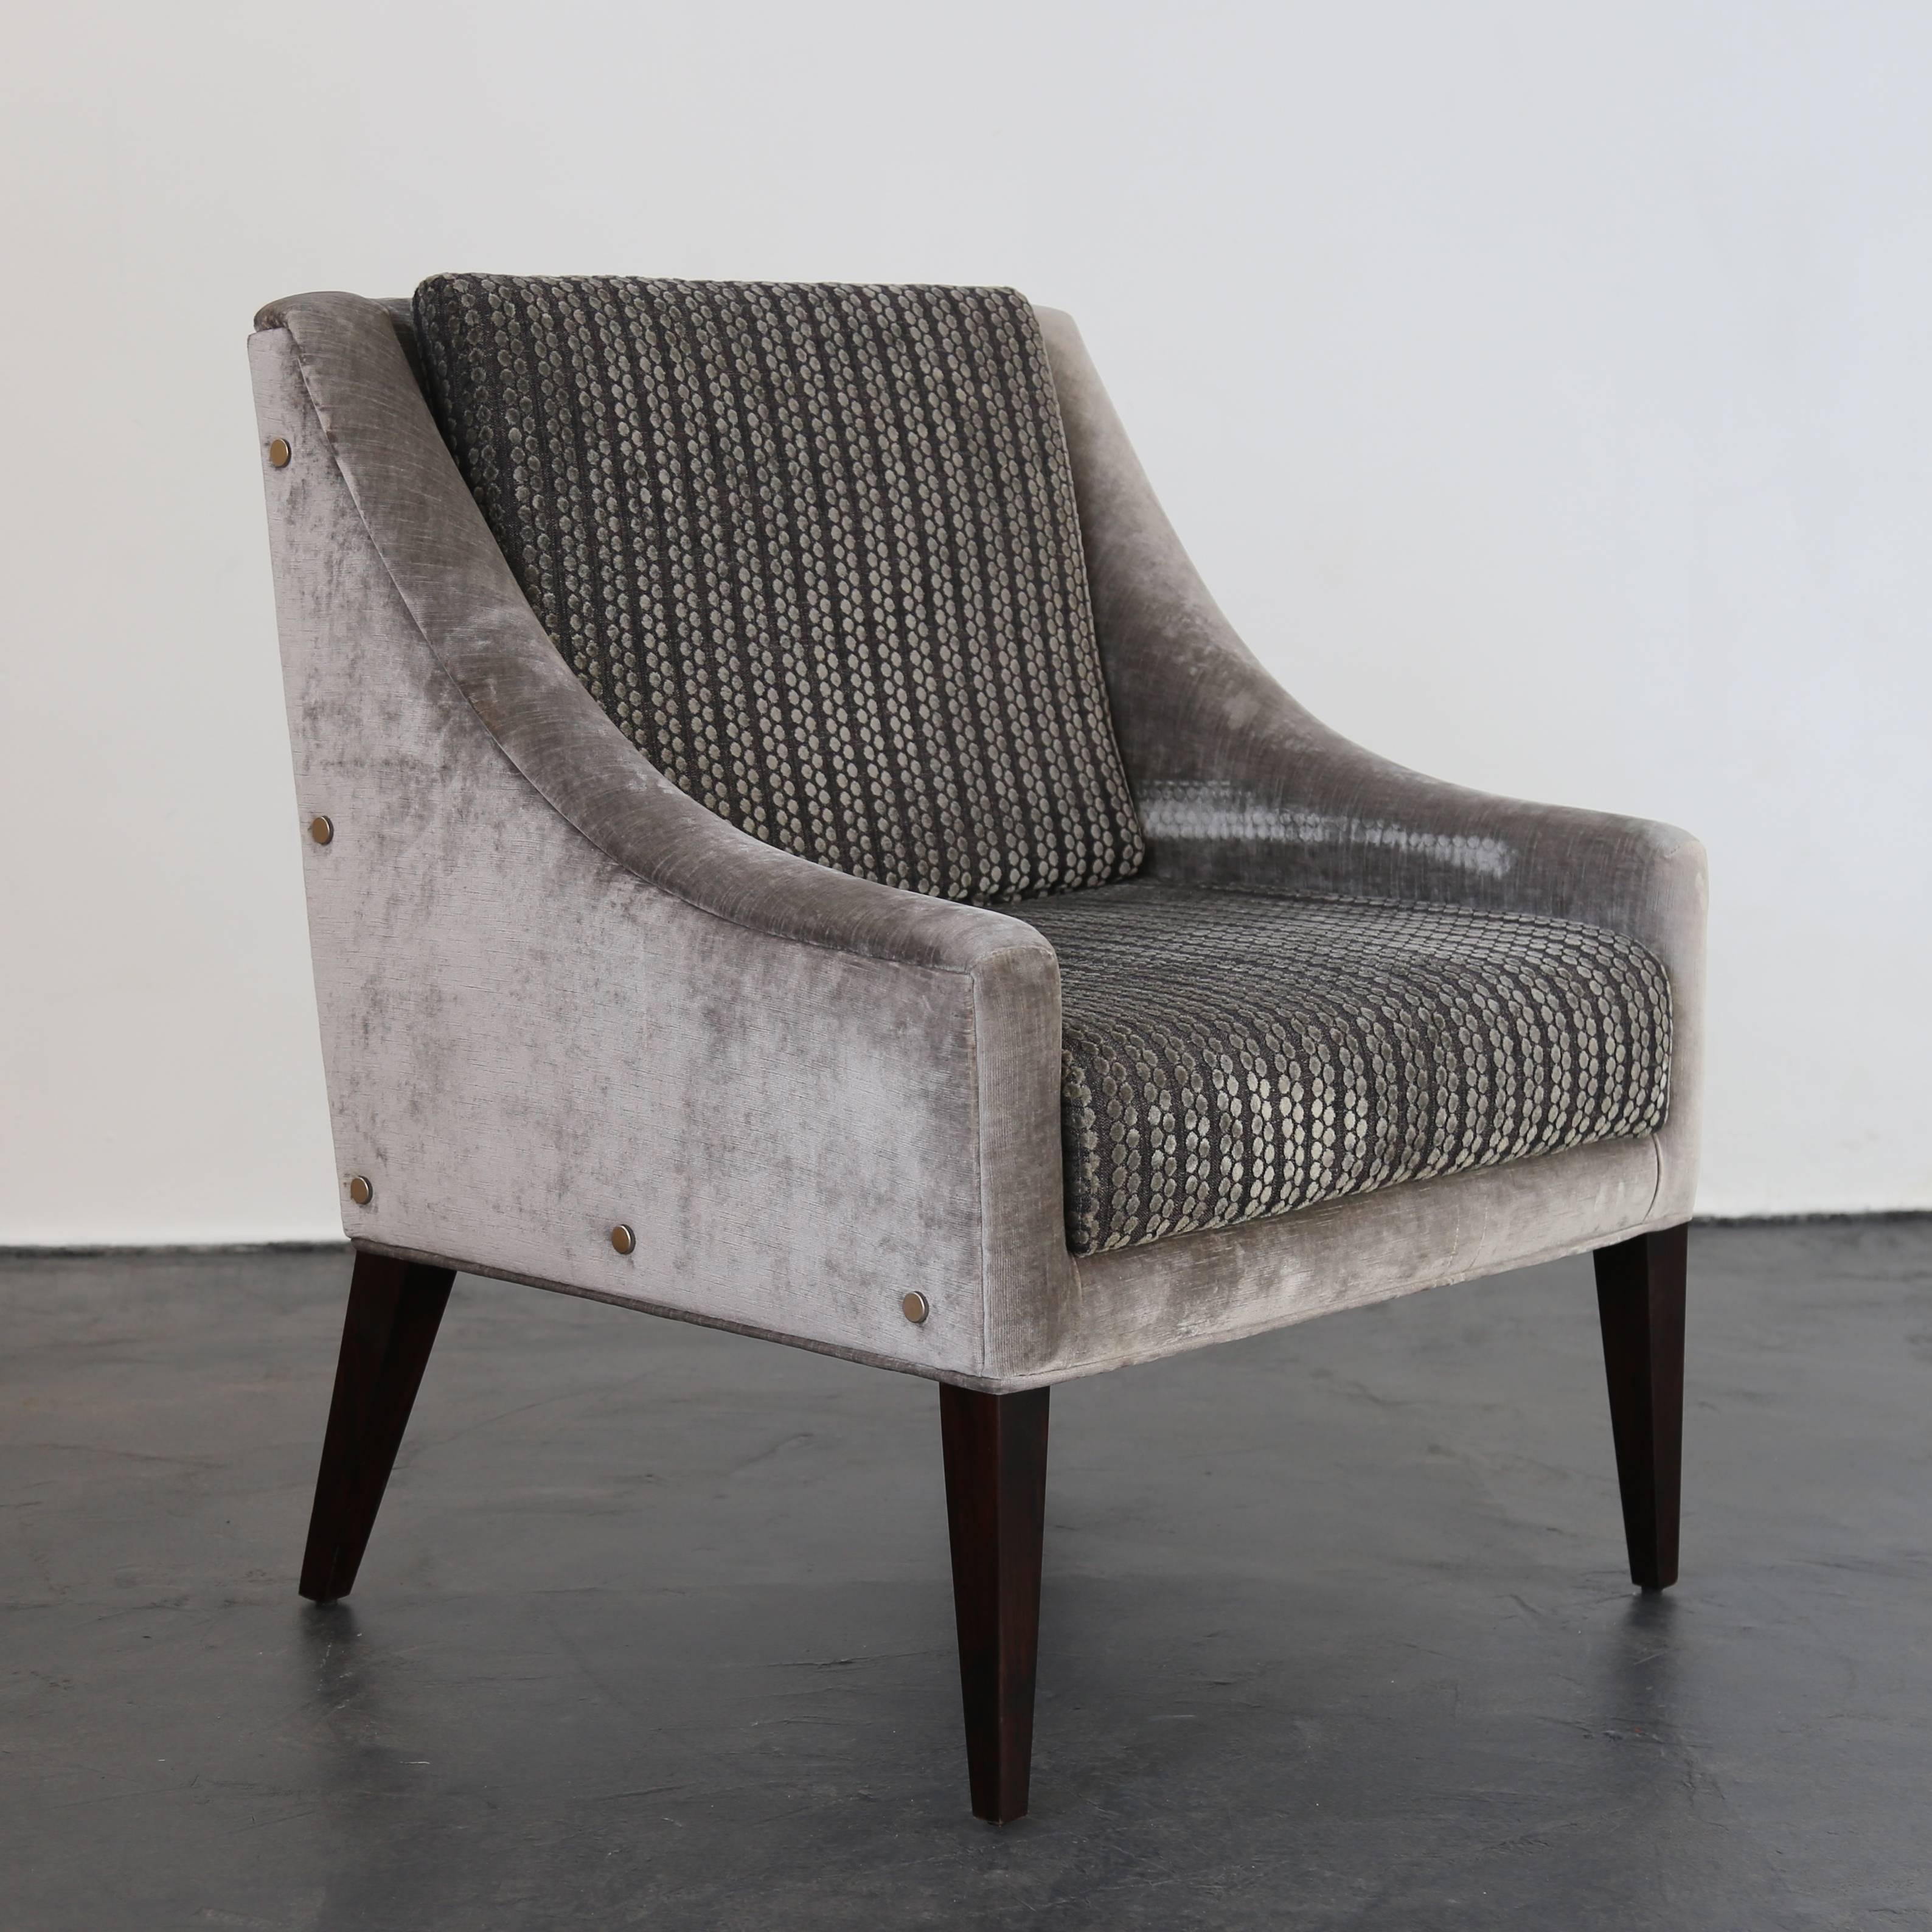 This elegant lounge chair with contrasting Kravet fabric and polished steel button details features gently sloping arms and dark Argentine Rosewood legs. Available as shown for immediate delivery or in your custom upholstery.